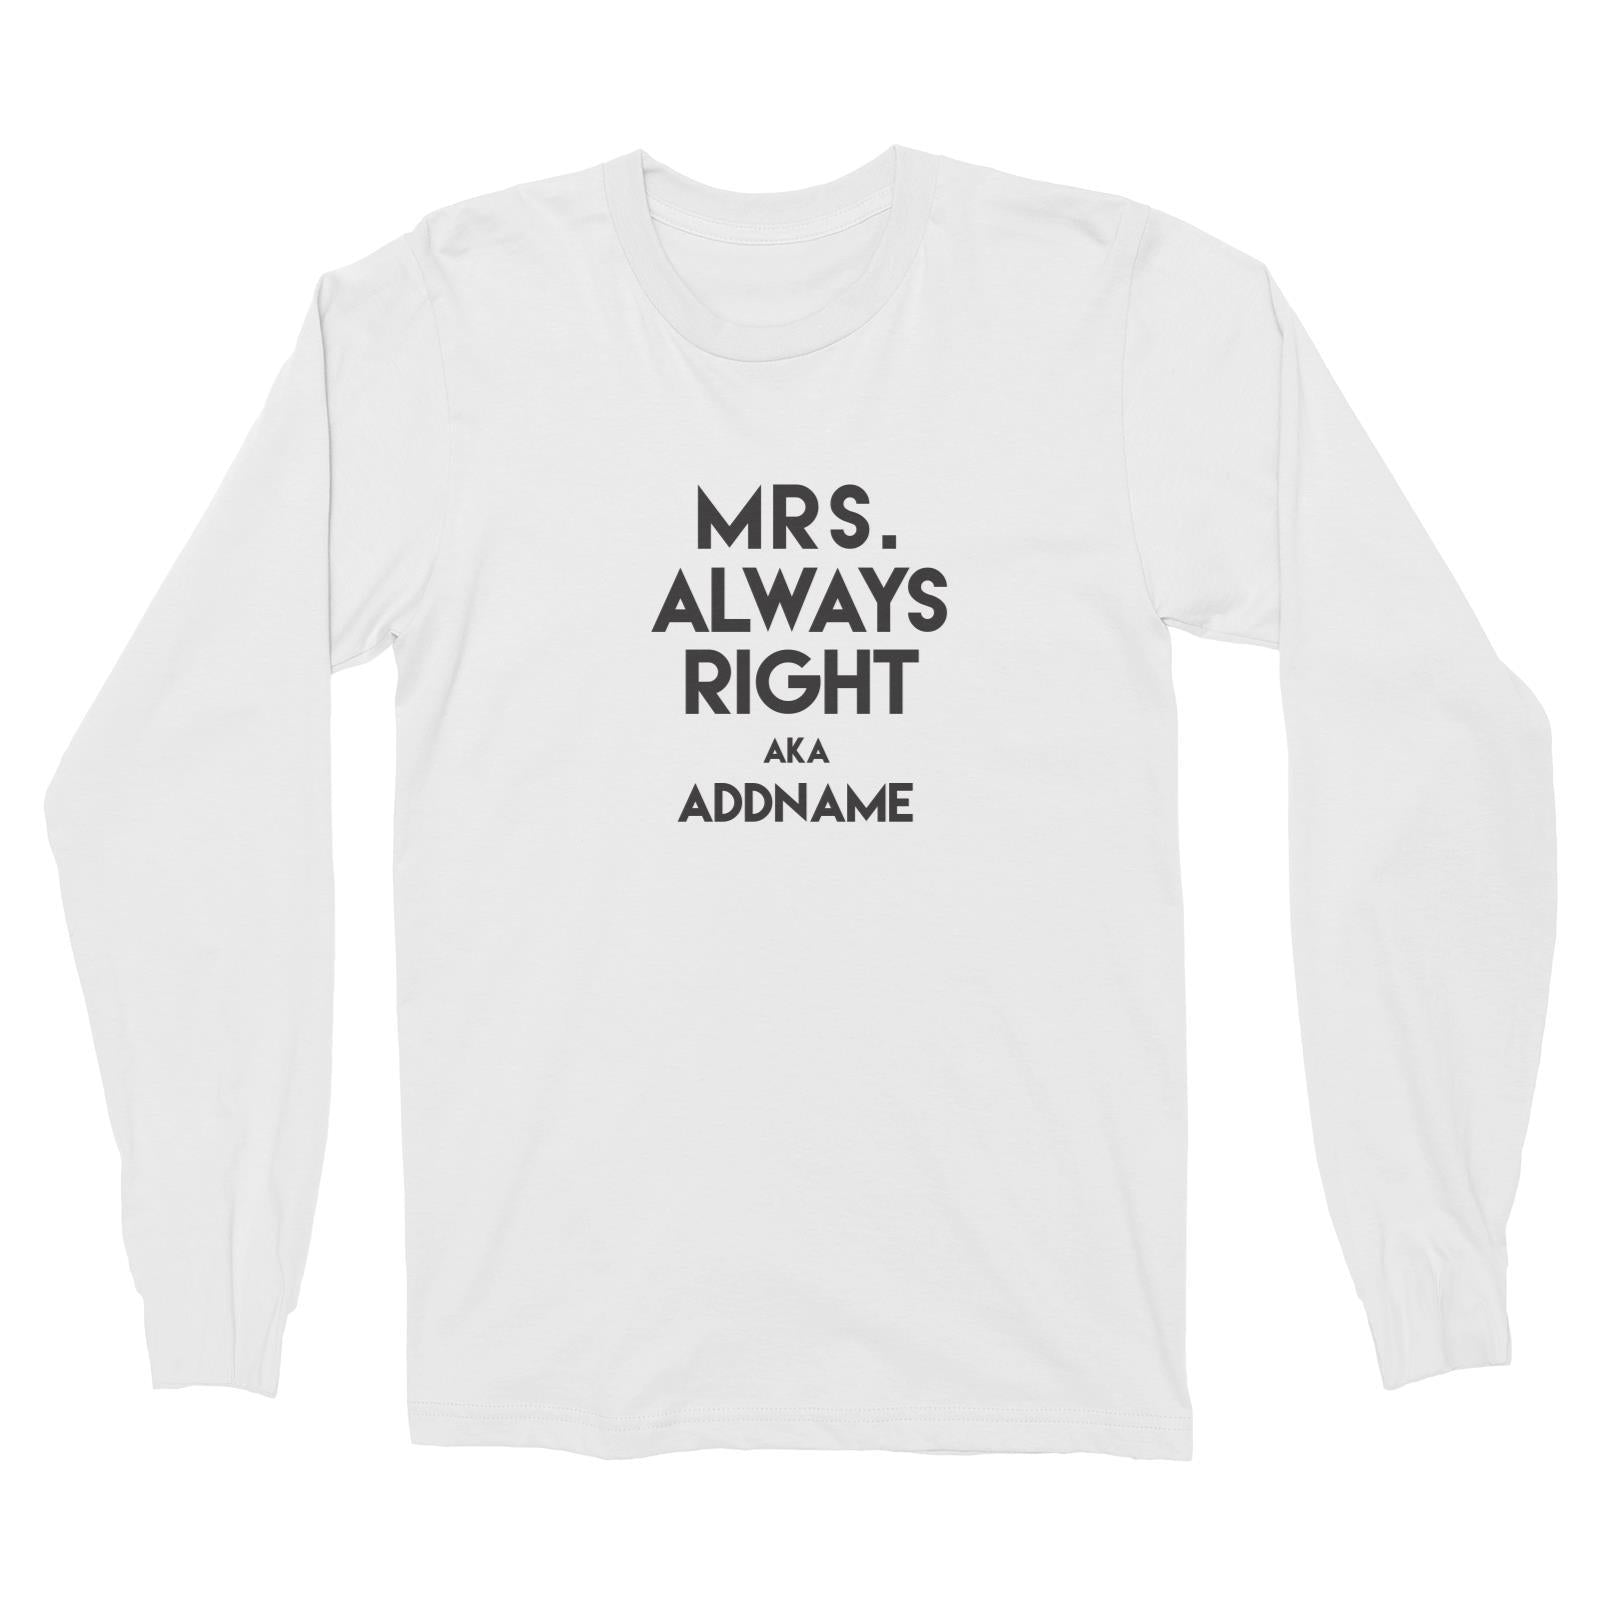 Mrs Always Right Addname Long Sleeve Unisex T-Shirt  Funny Matching Family Personalizable Designs